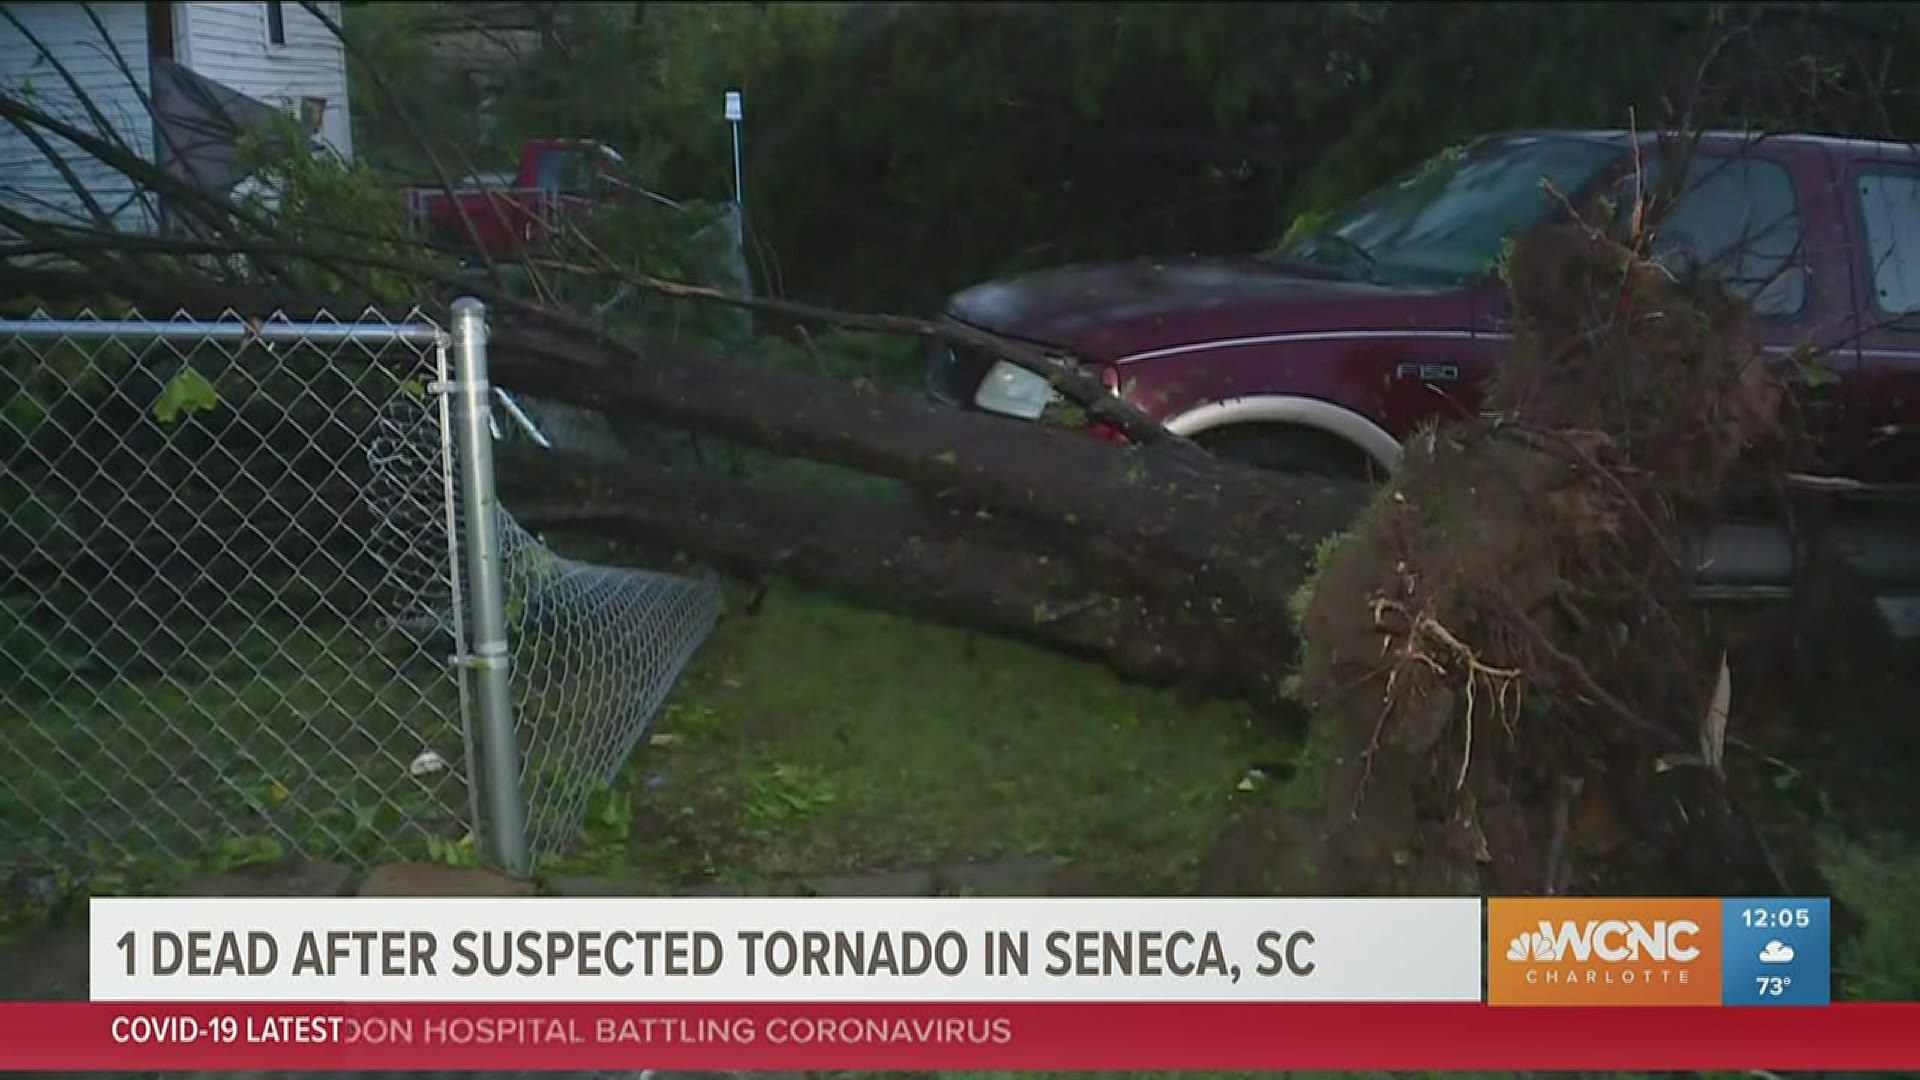 One person was killed when a believed tornado touched down in Seneca, South Carolina early Monday, causing widespread damage.